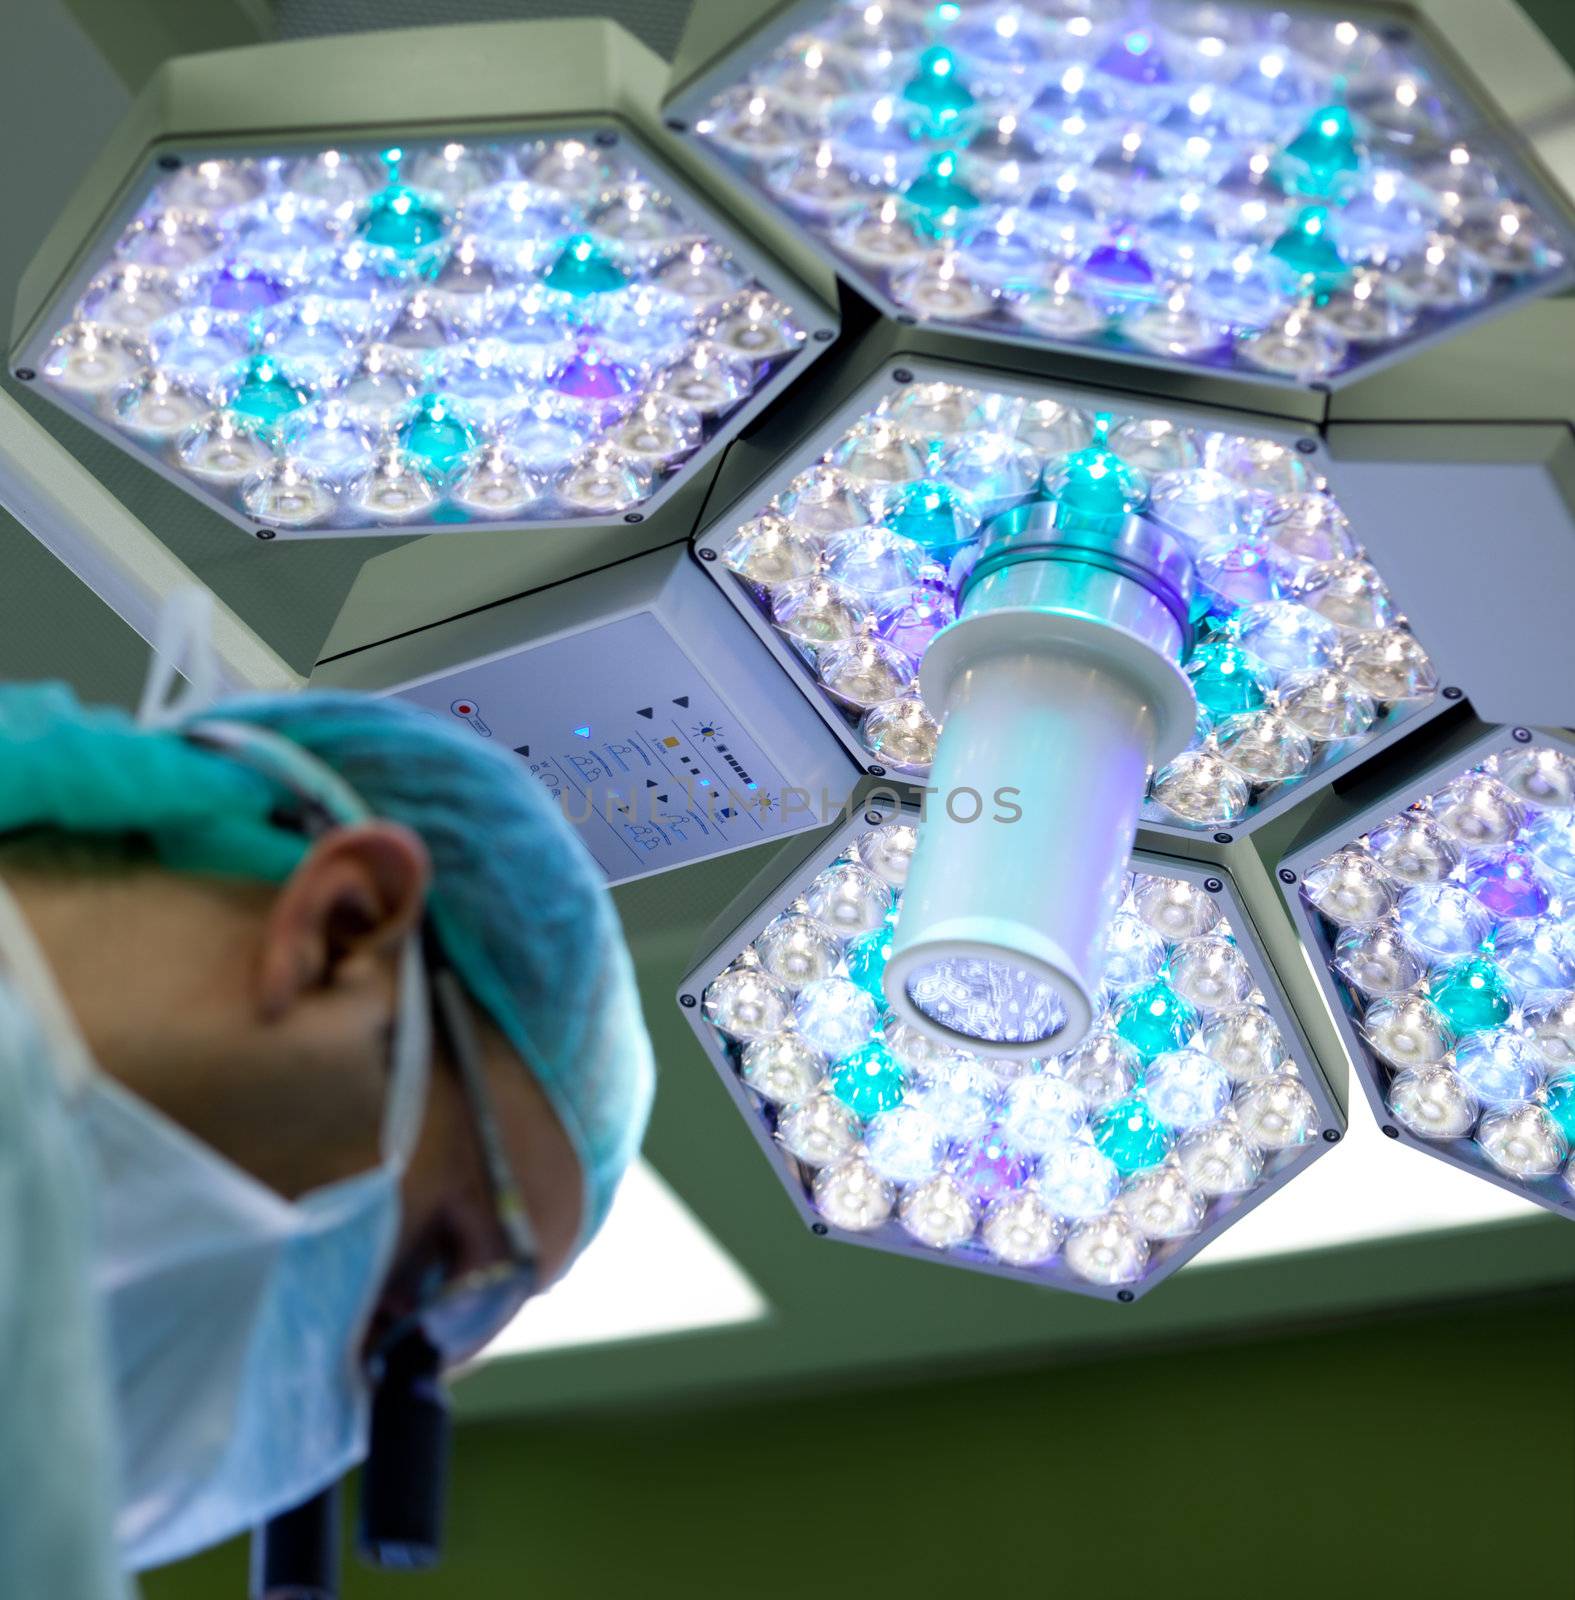 Big lamp in operating room by vilevi